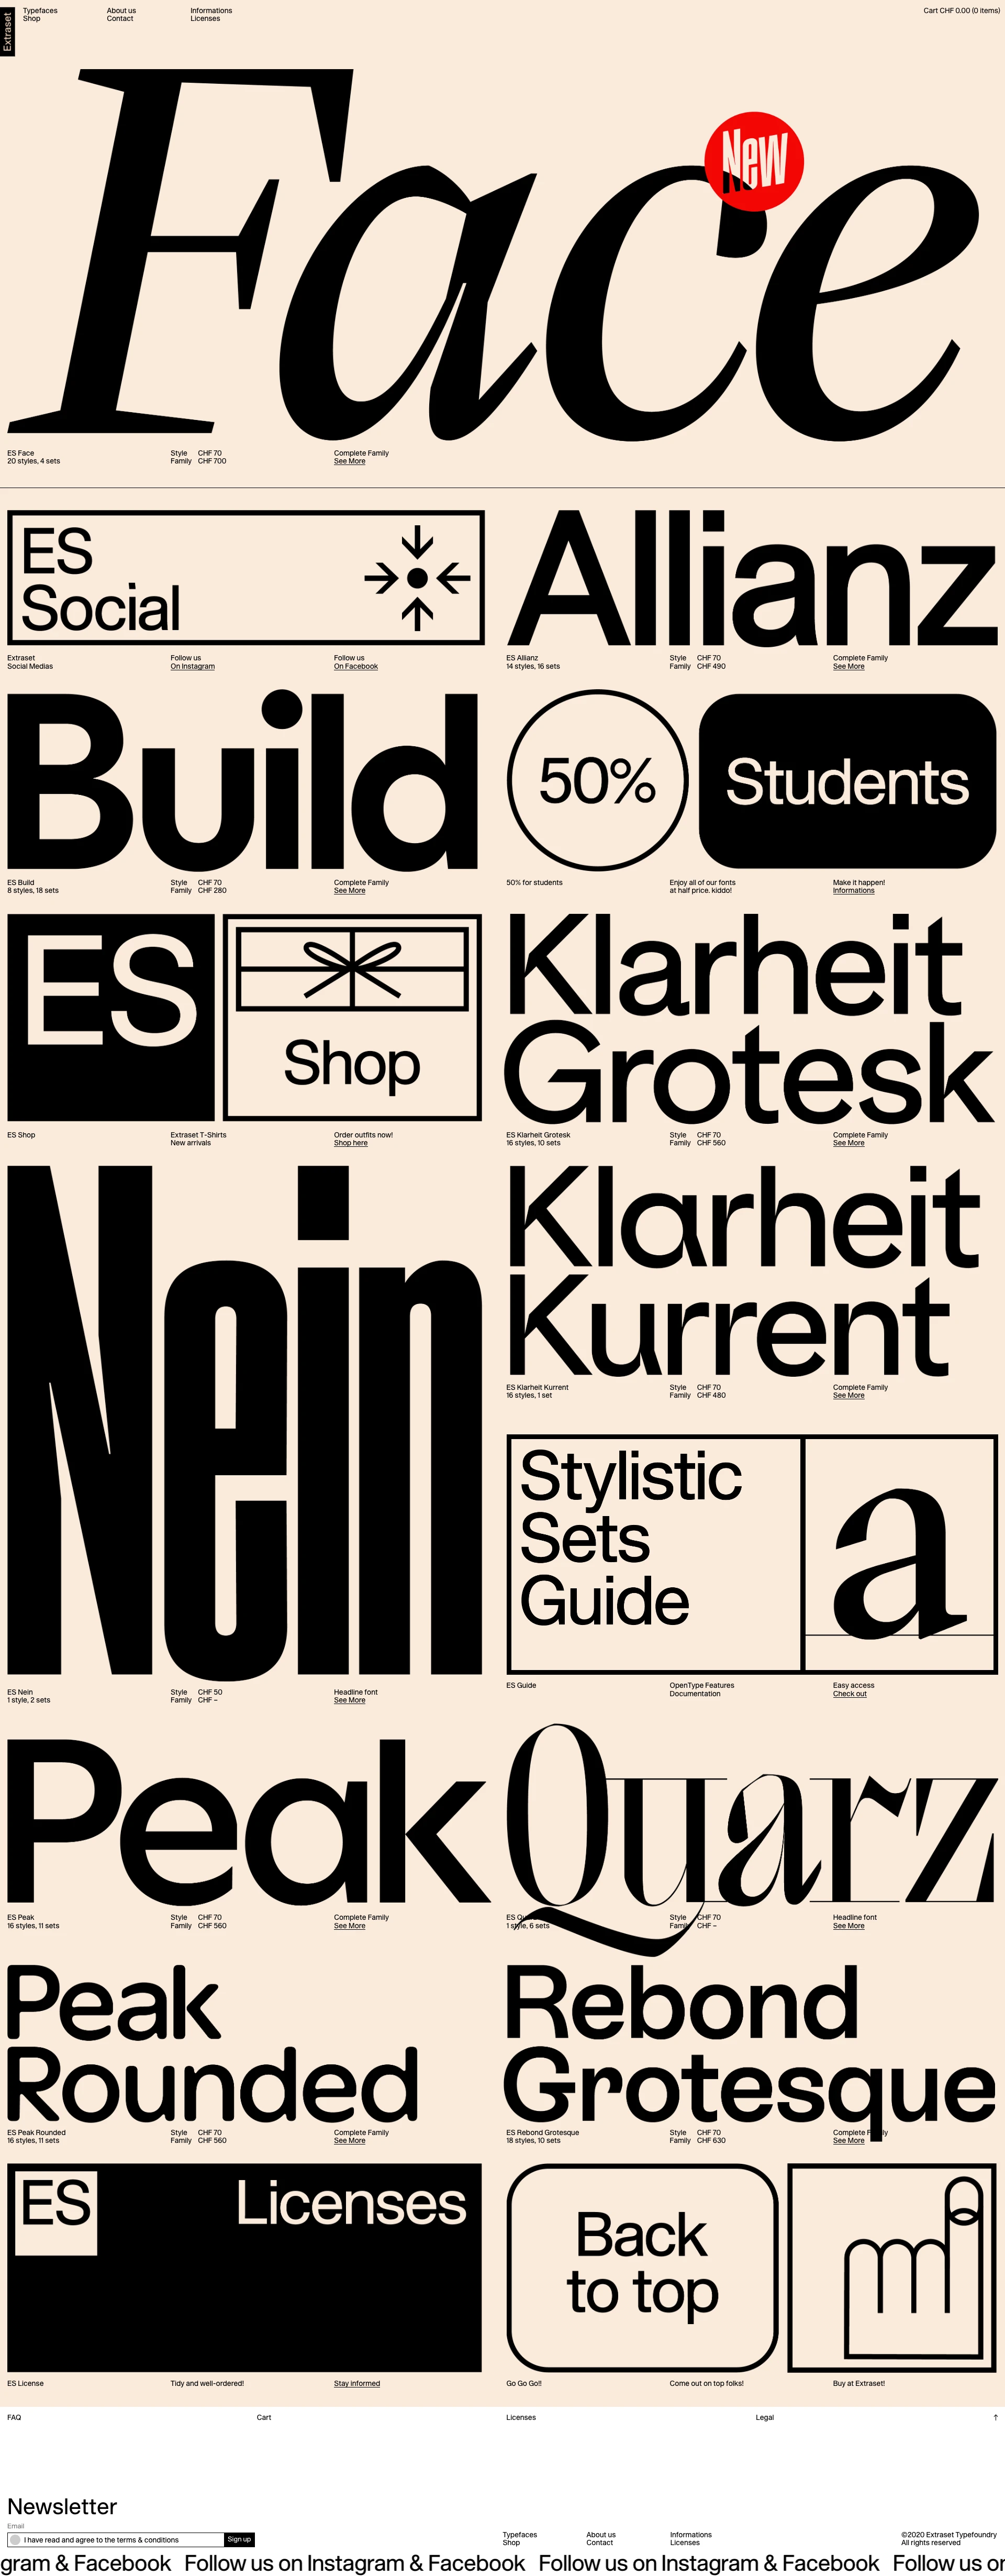 Extraset Landing Page Example: Extraset is an independent Swiss type foundry established in Geneva, jointly led by Alex Dujet (Futur Neue), Xavier Erni (Neo Neo), Roger Gaillard (Cécile + Roger) and David Mamie (TM Todeschini + Mamie). Extraset publishes professional typefaces made by graphic designers for graphic designers.